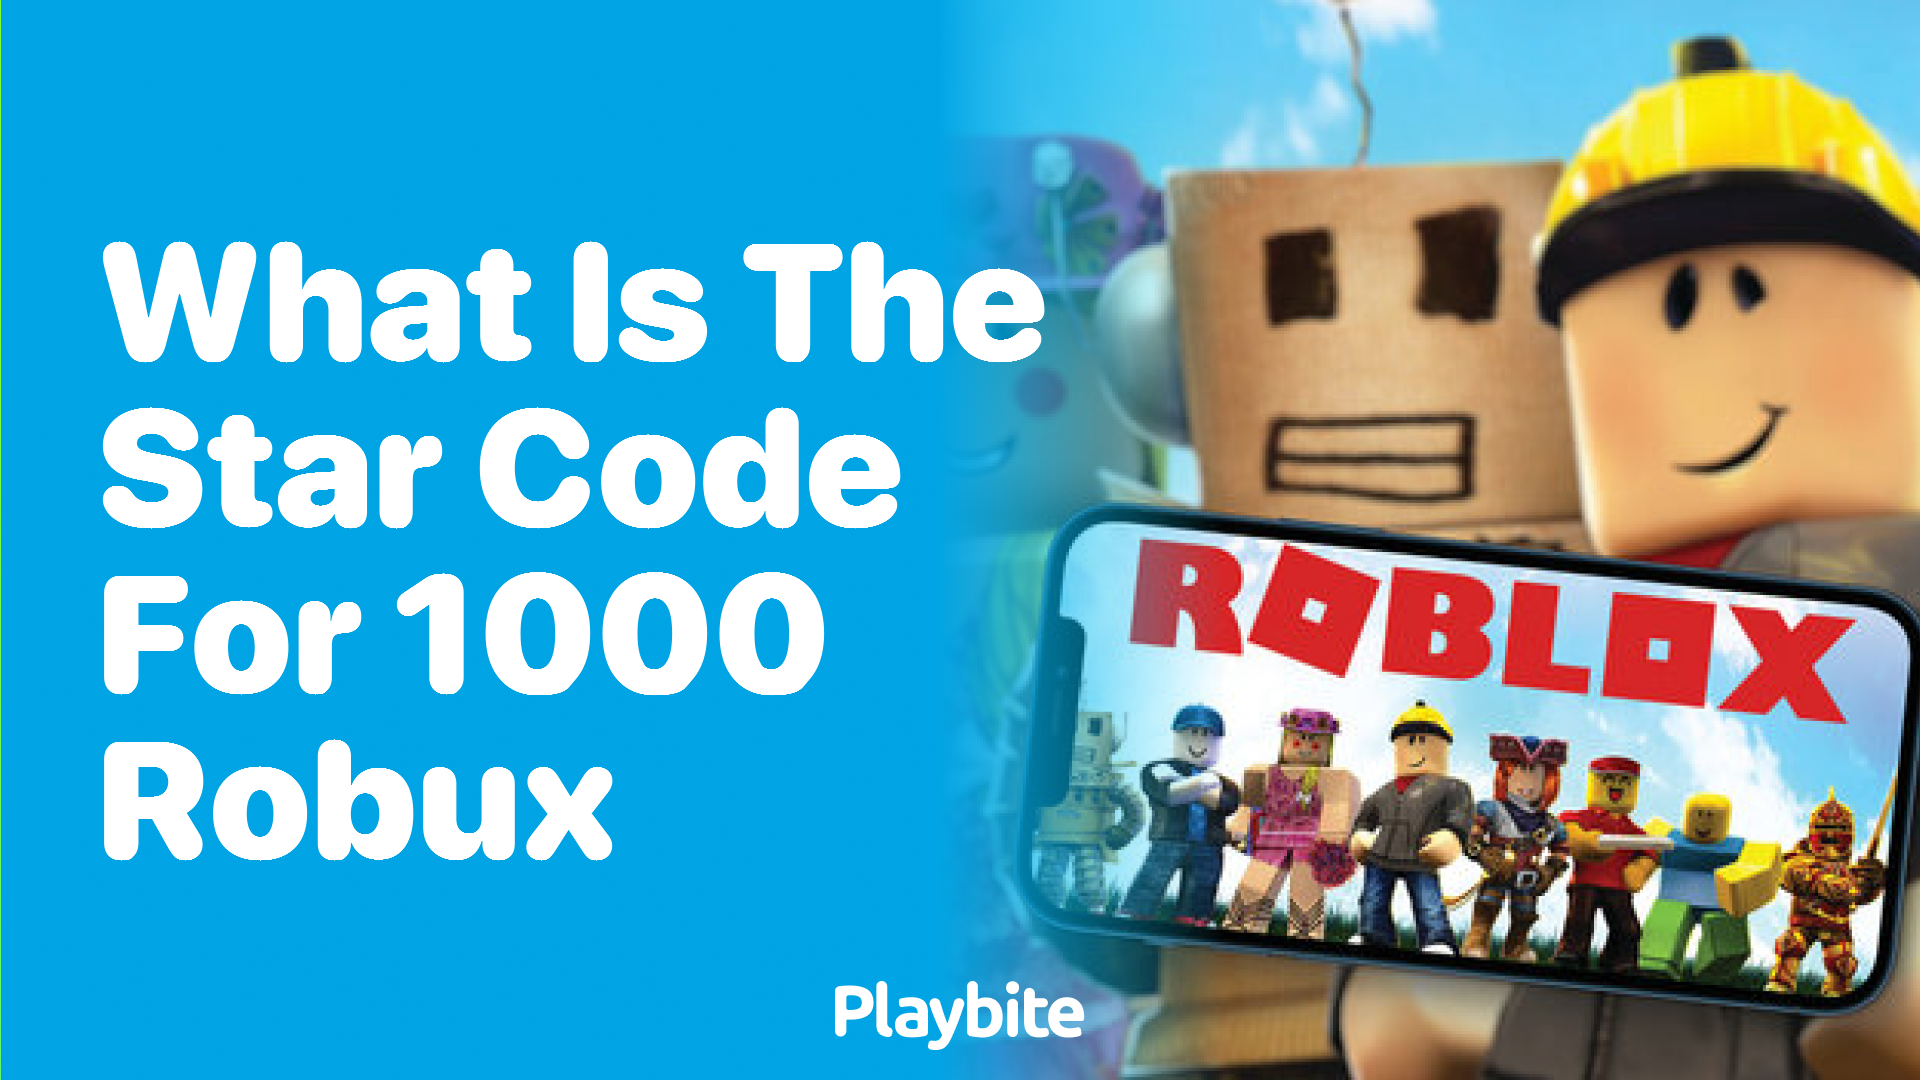 Roblox Gift Card Code - 1000 Roblox Robux 1000 (Code Only) : :  Video Games